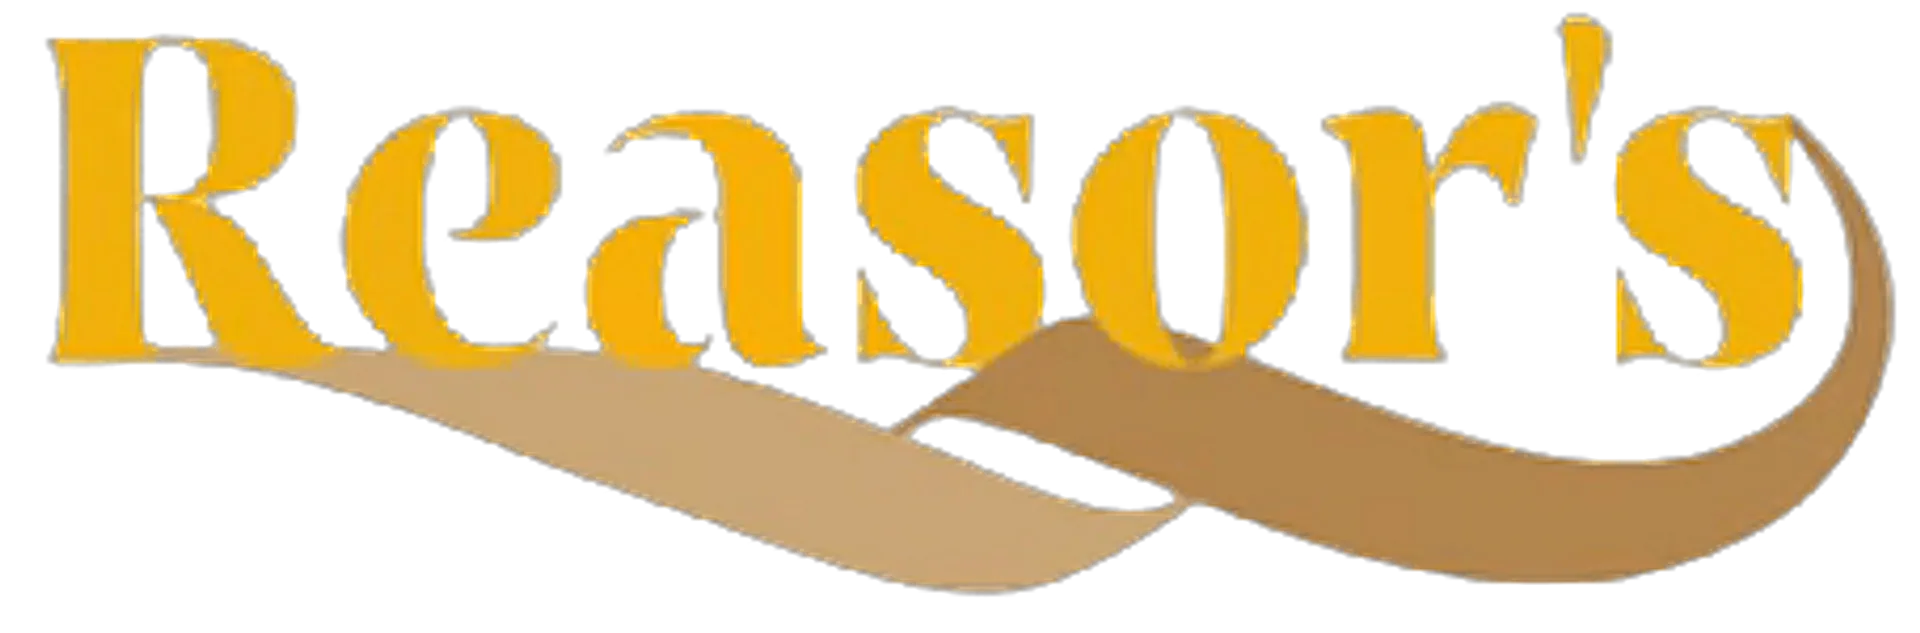 REASOR'S logo current weekly ad